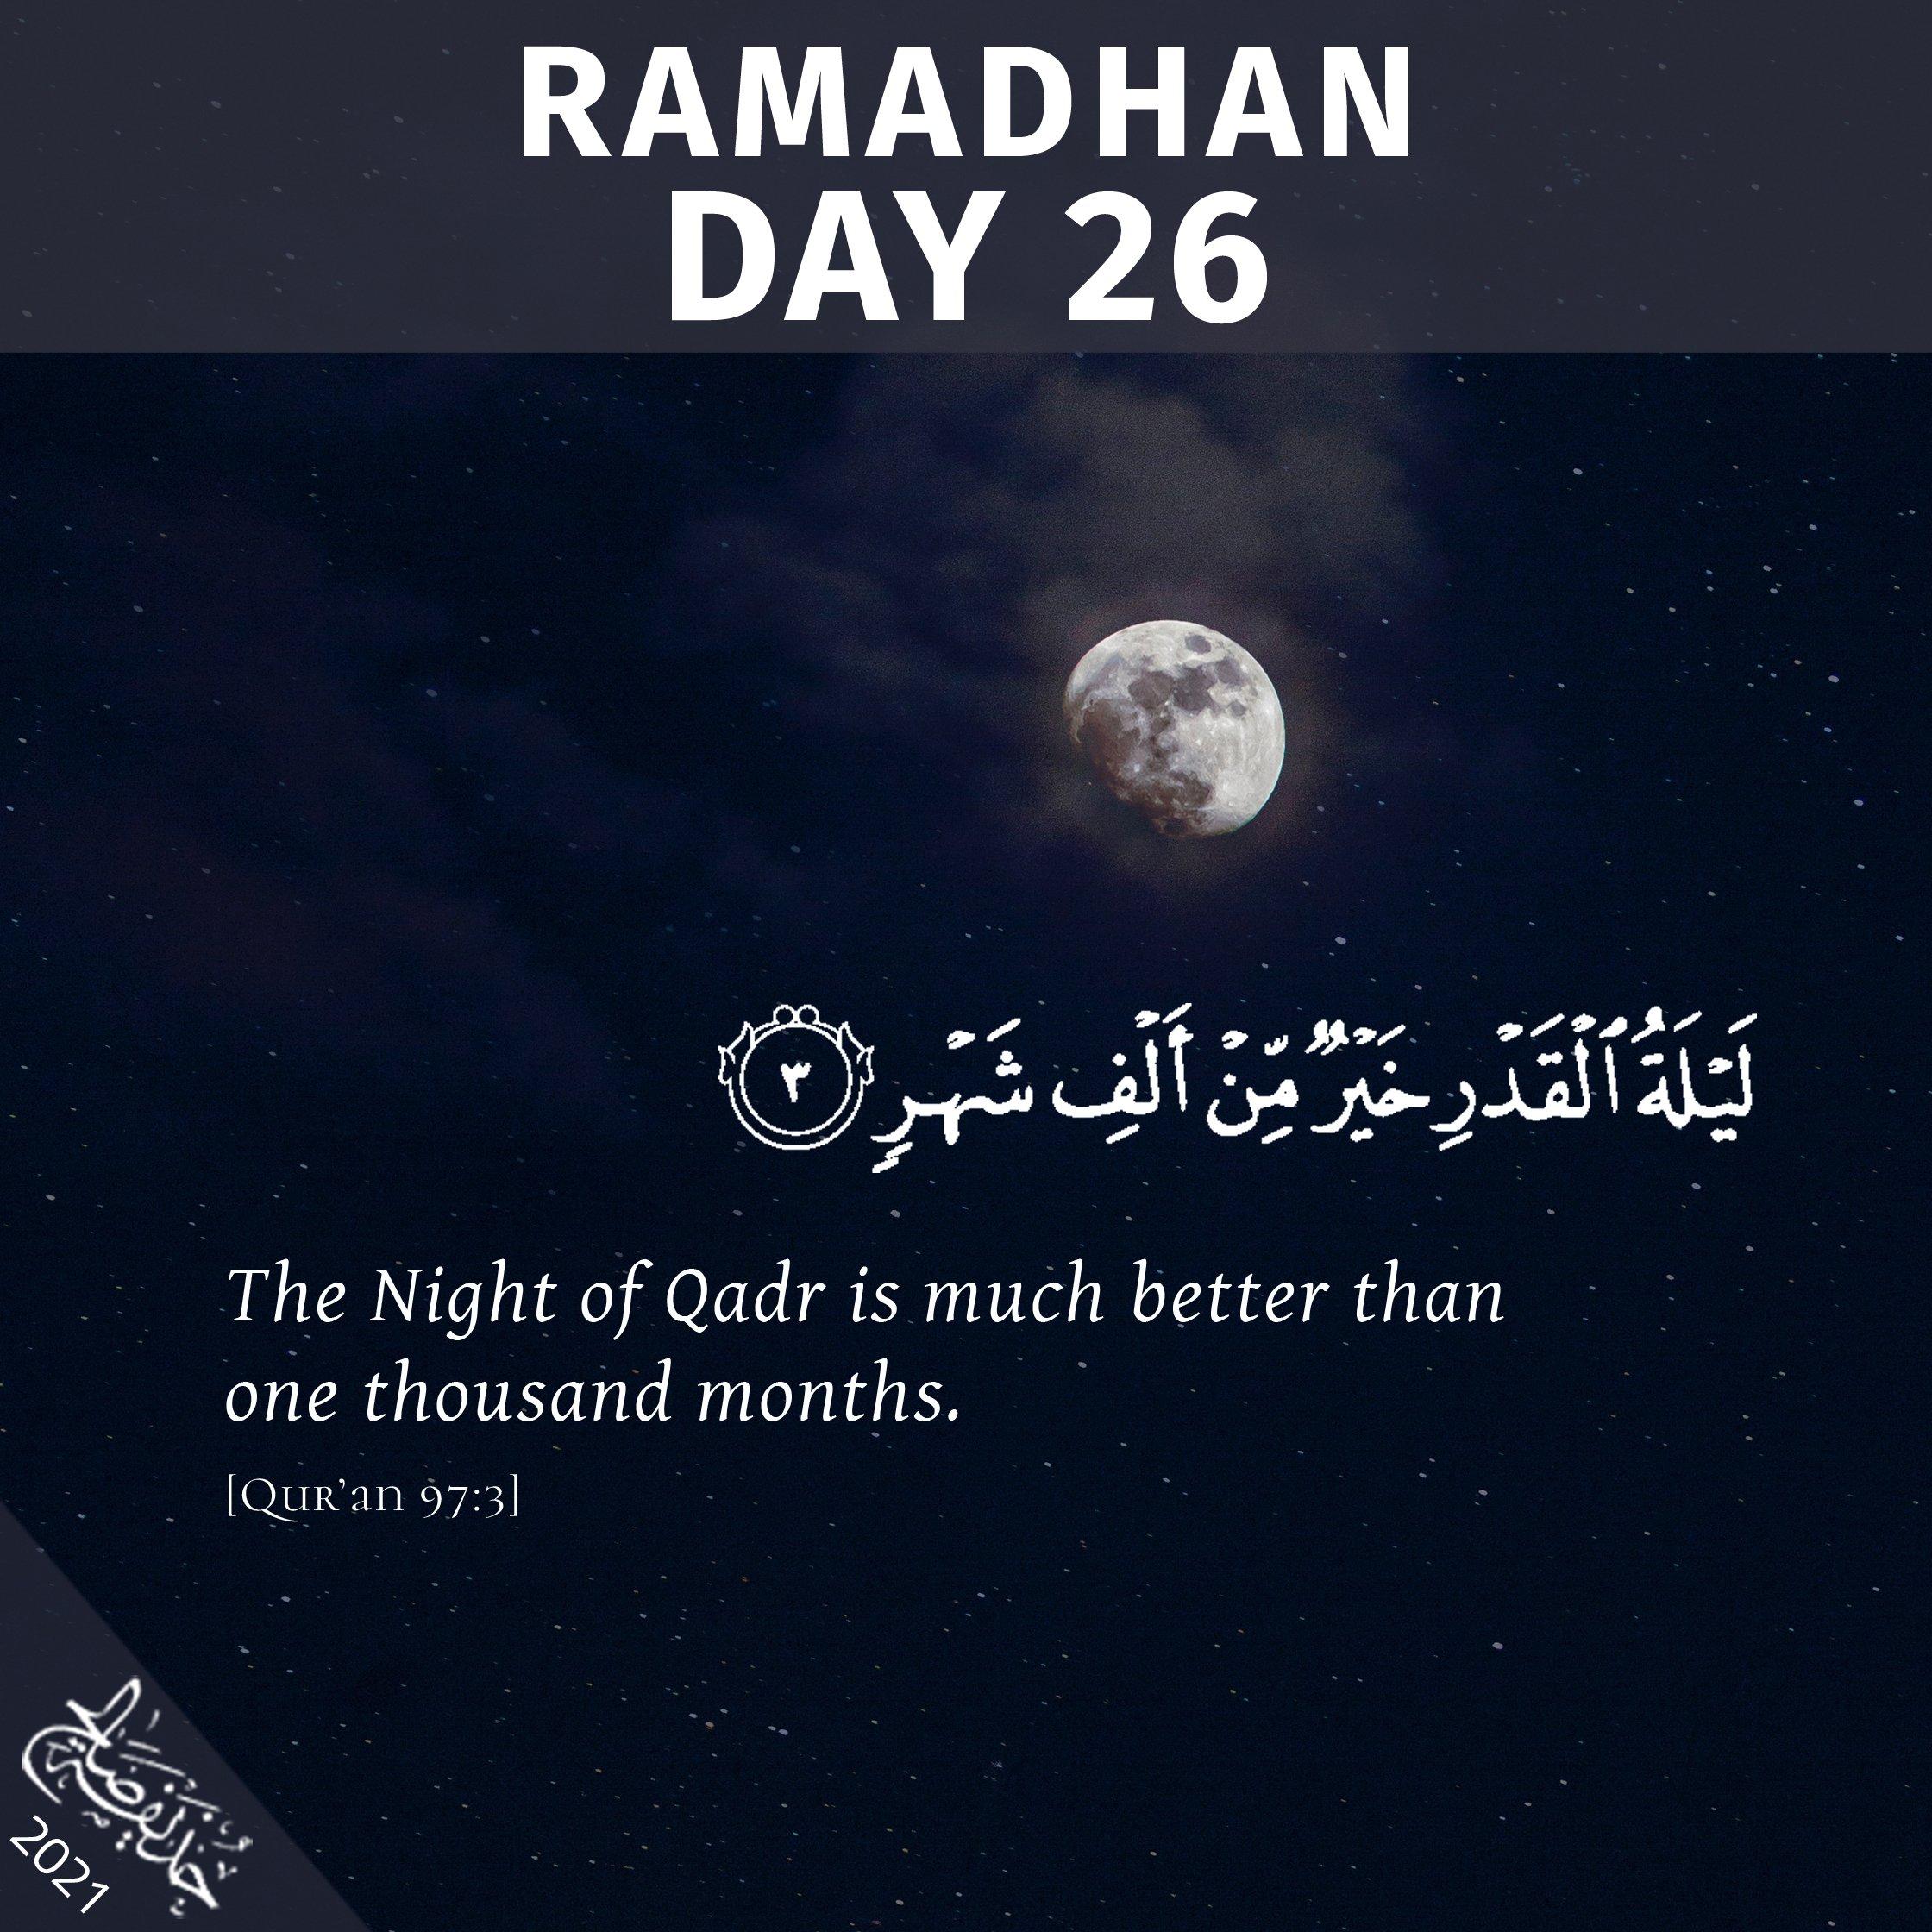 E01MKCAXIAABYVaformatjpgname4096x4096 1 - Daily Ramadhan Reminders (2021)